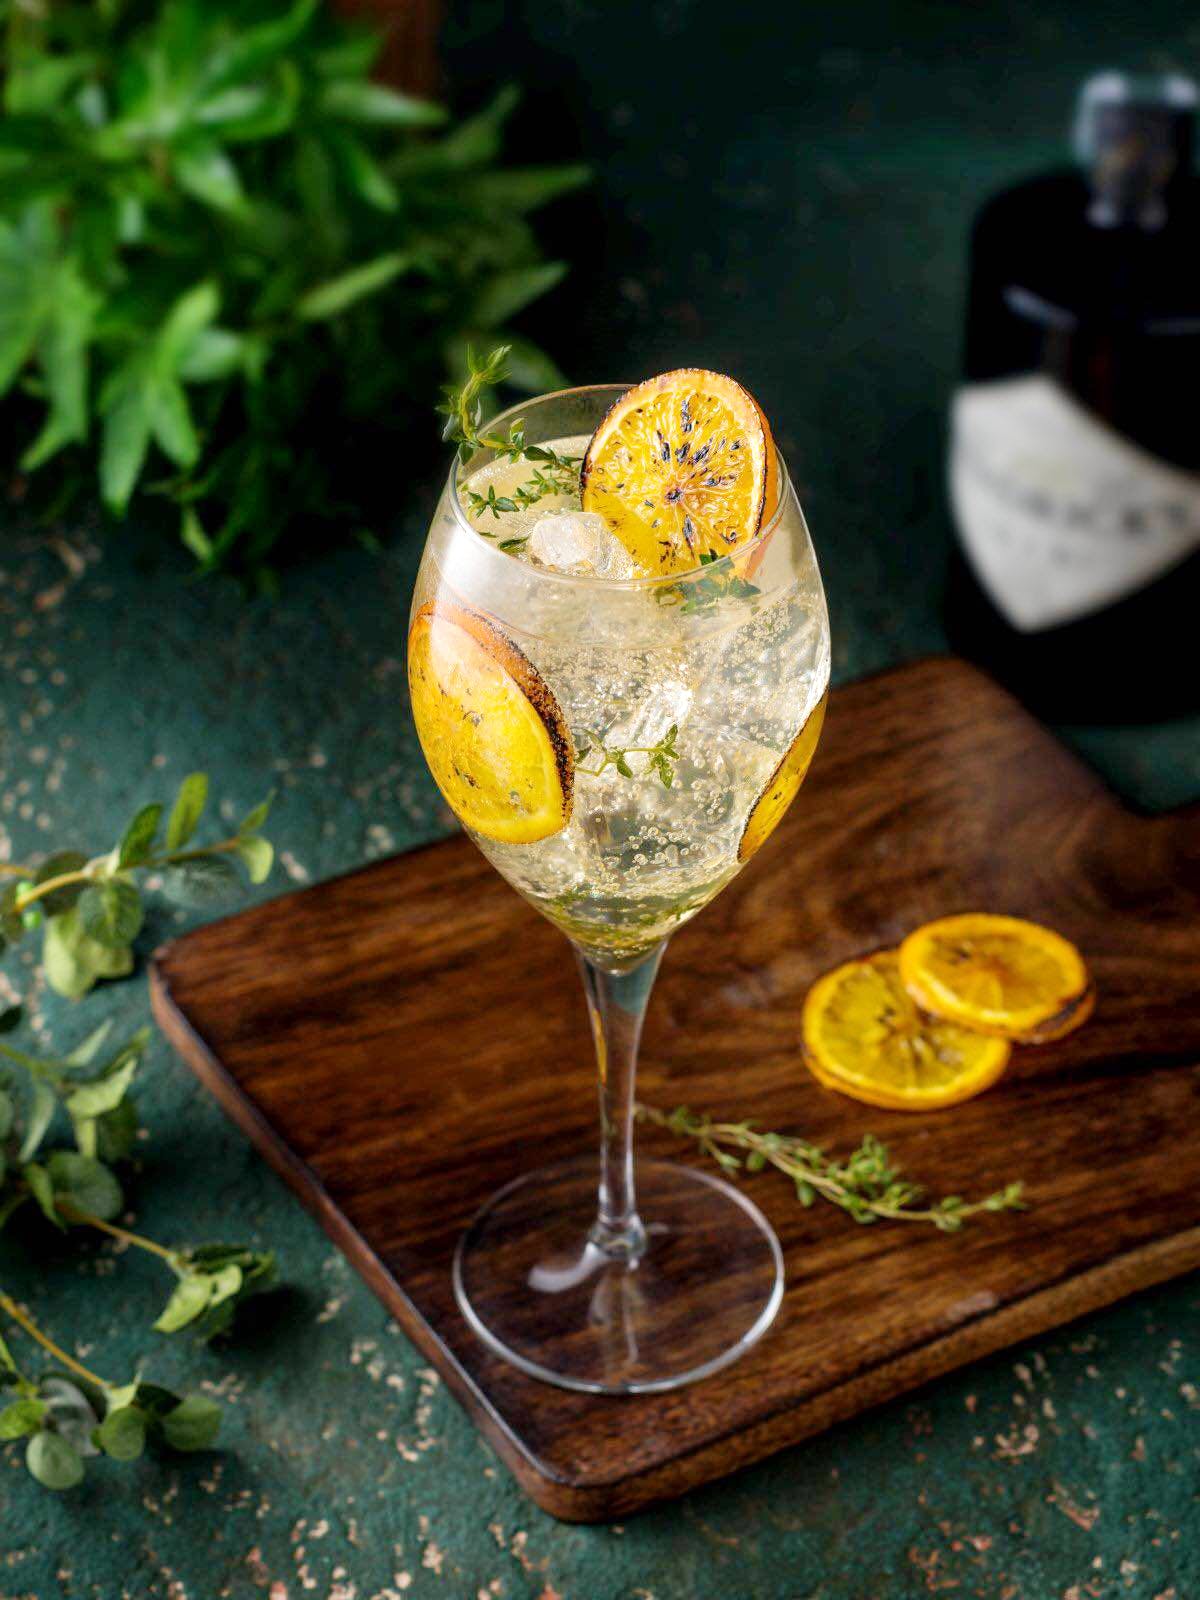 Champagne cocktail,Drink,Gin and tonic,Food,Alcoholic beverage,French 75,Distilled beverage,Wine cocktail,Spritzer,Ingredient